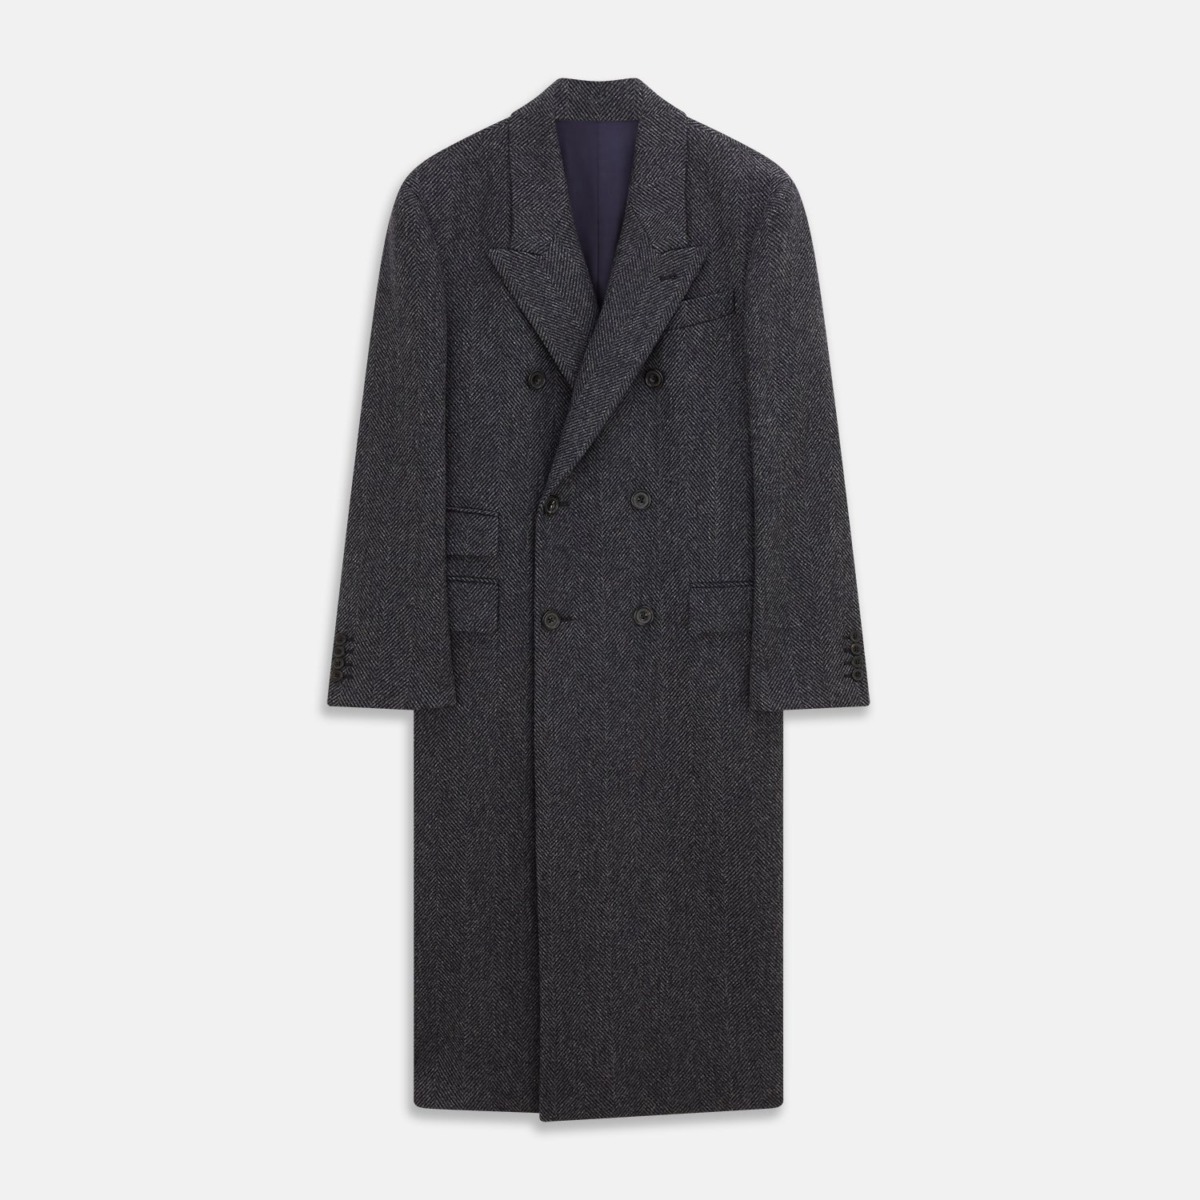 Grey Coat for Man at Turnbull And Asser GOOFASH